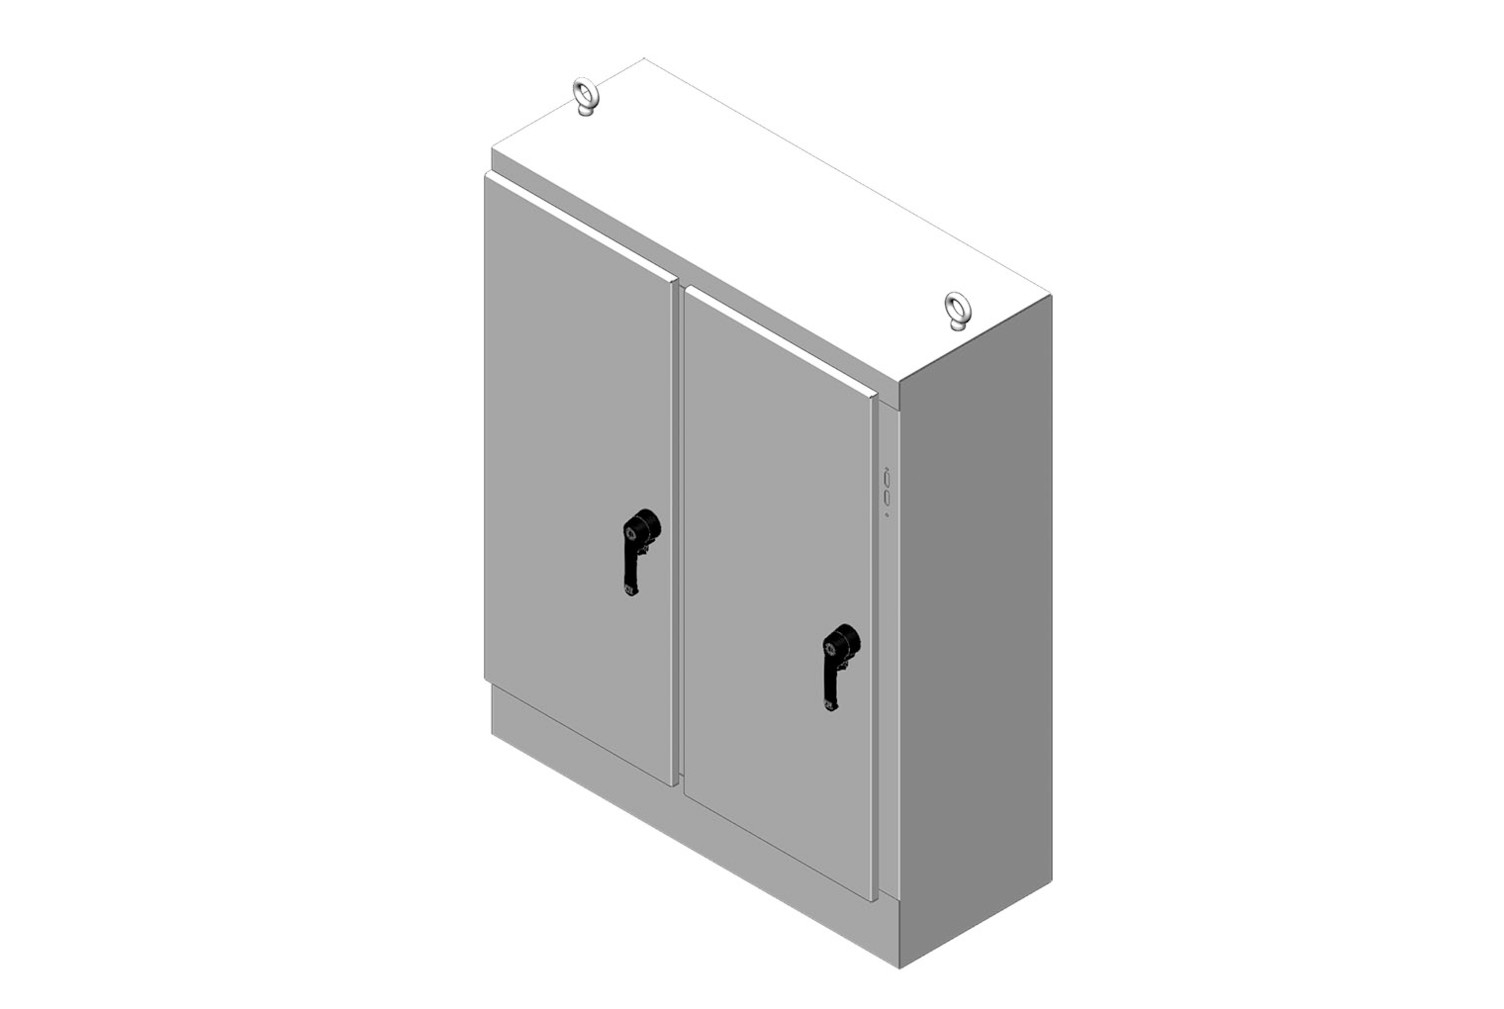 RMR Free-Standing Disconnect Enclosure, Type 4, with Solid Double Door - Image 1